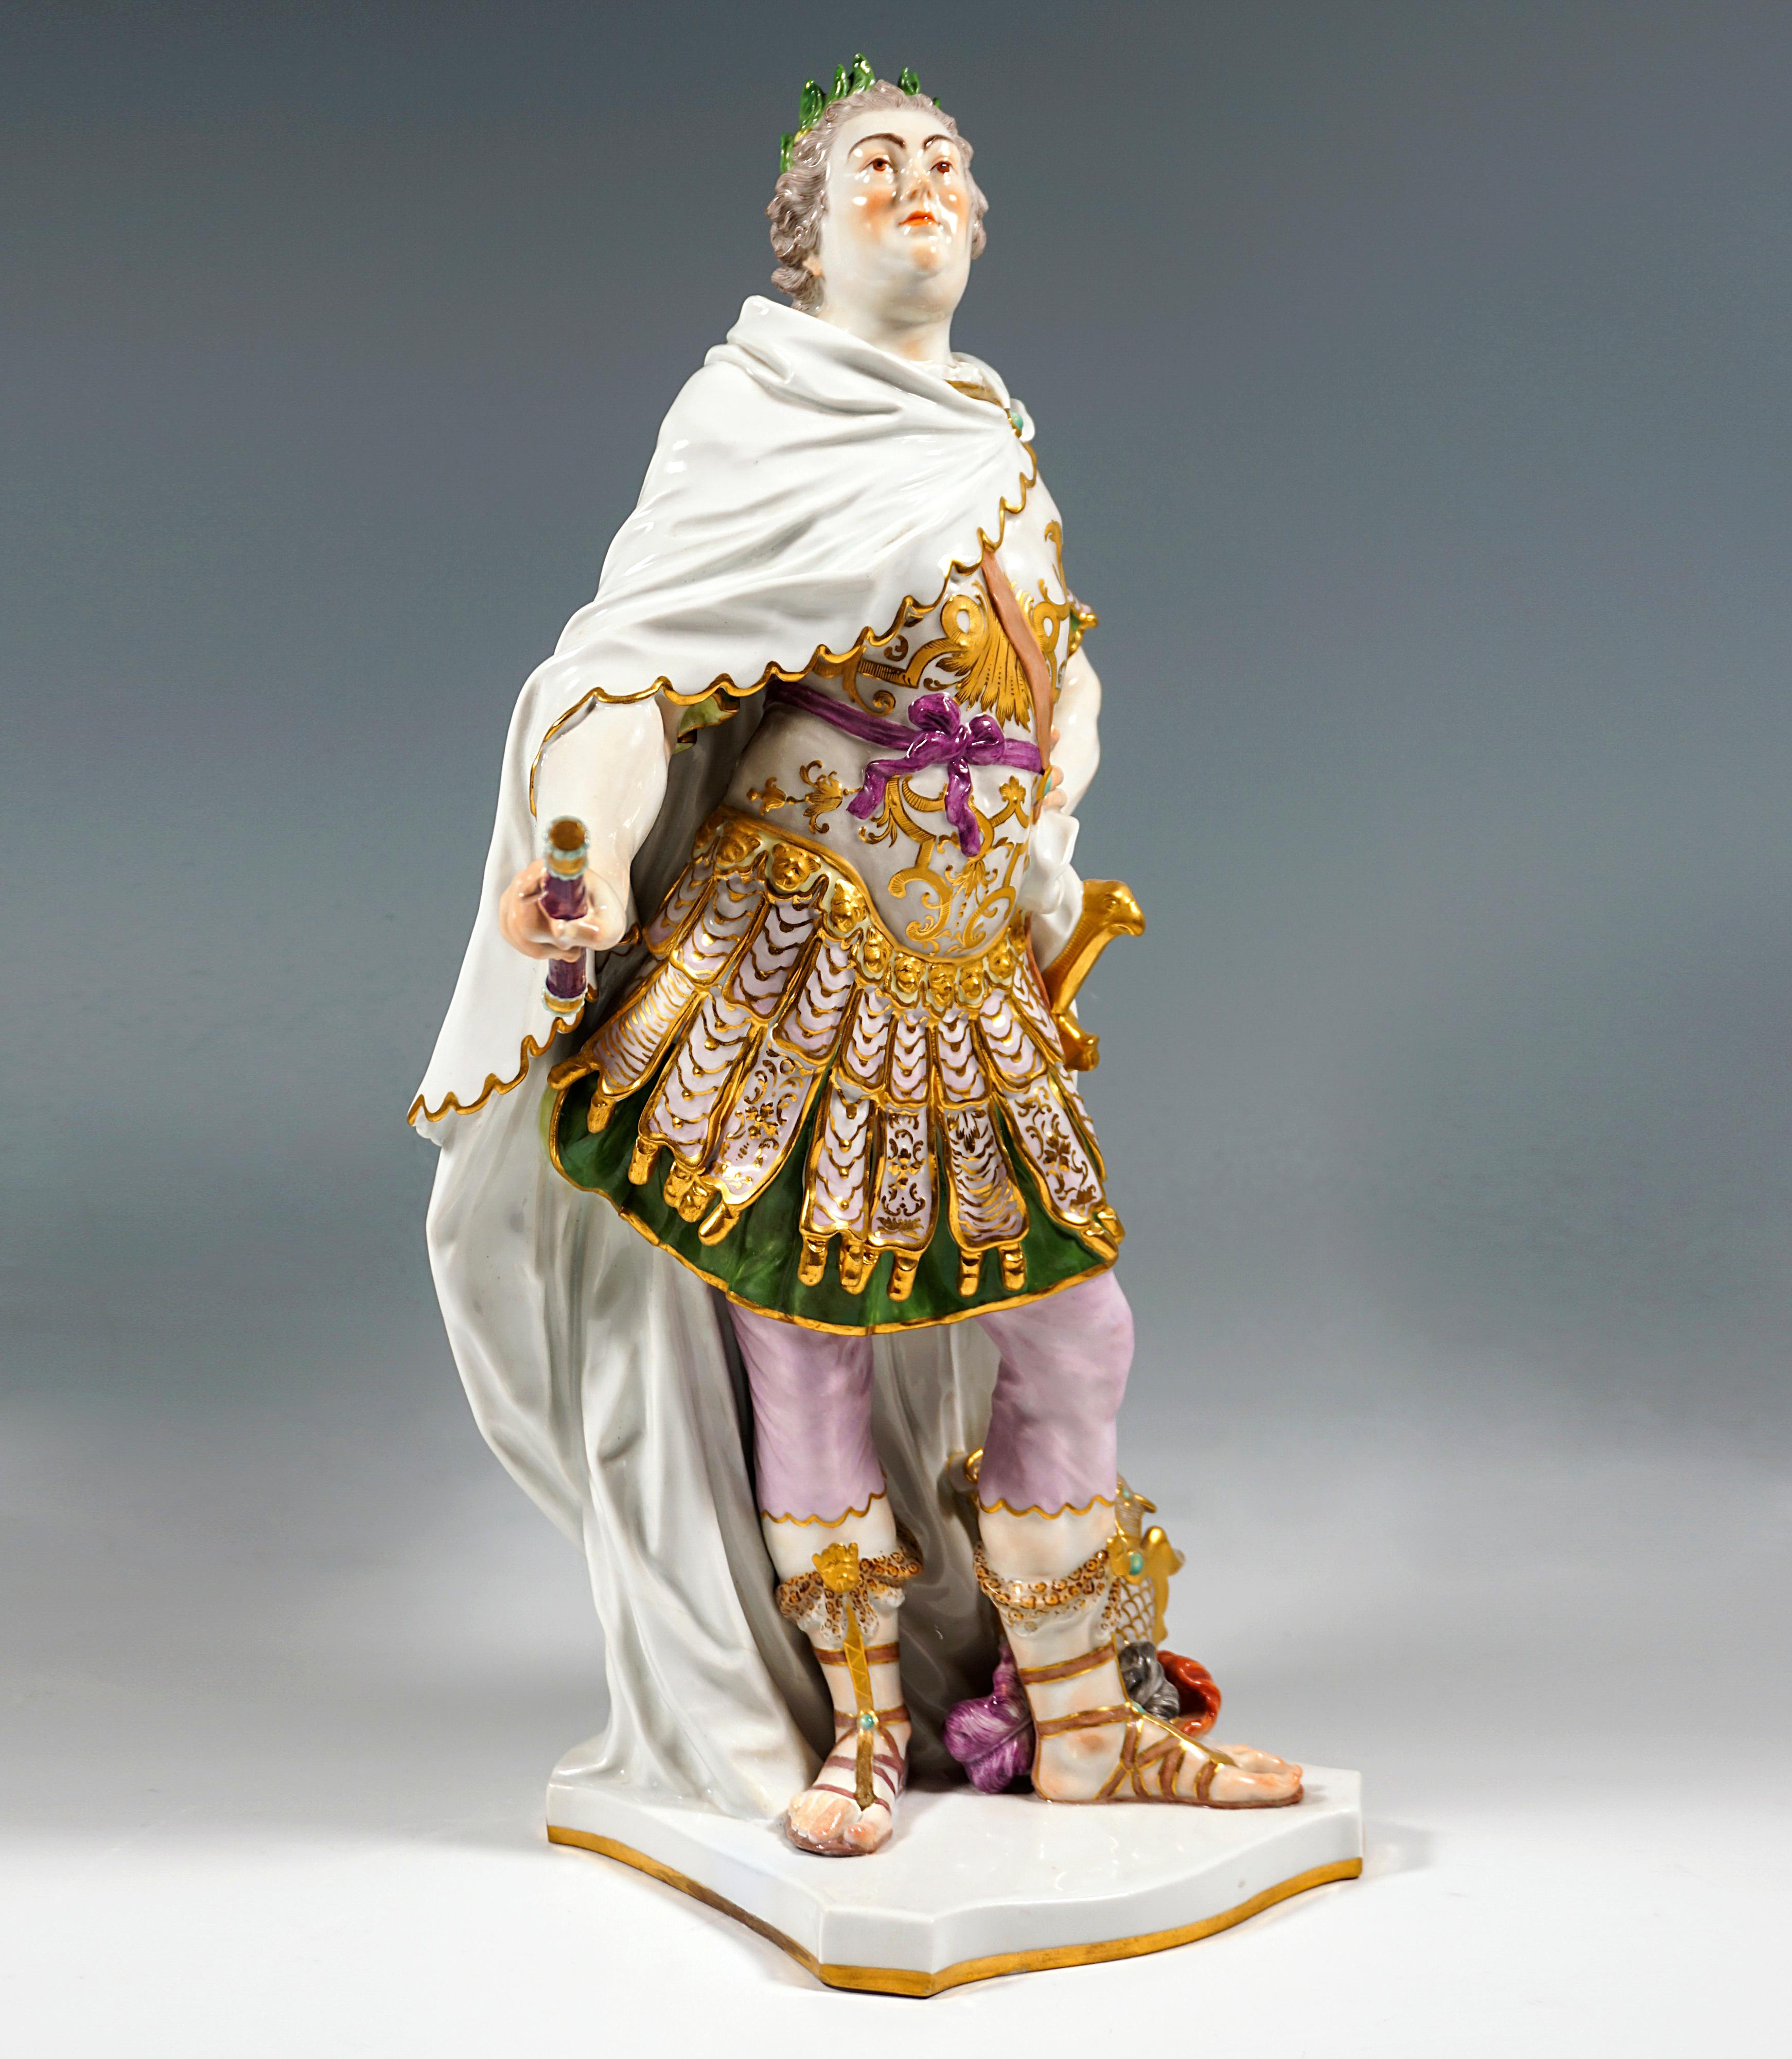 Very rare and impressive porcelain statuette:
Like all Baroque rulers, Augustus the Strong and his son Augustus III cultivated demonstrations of their power to represent and legitimise their rule. Their mythological and allegorical stagings were